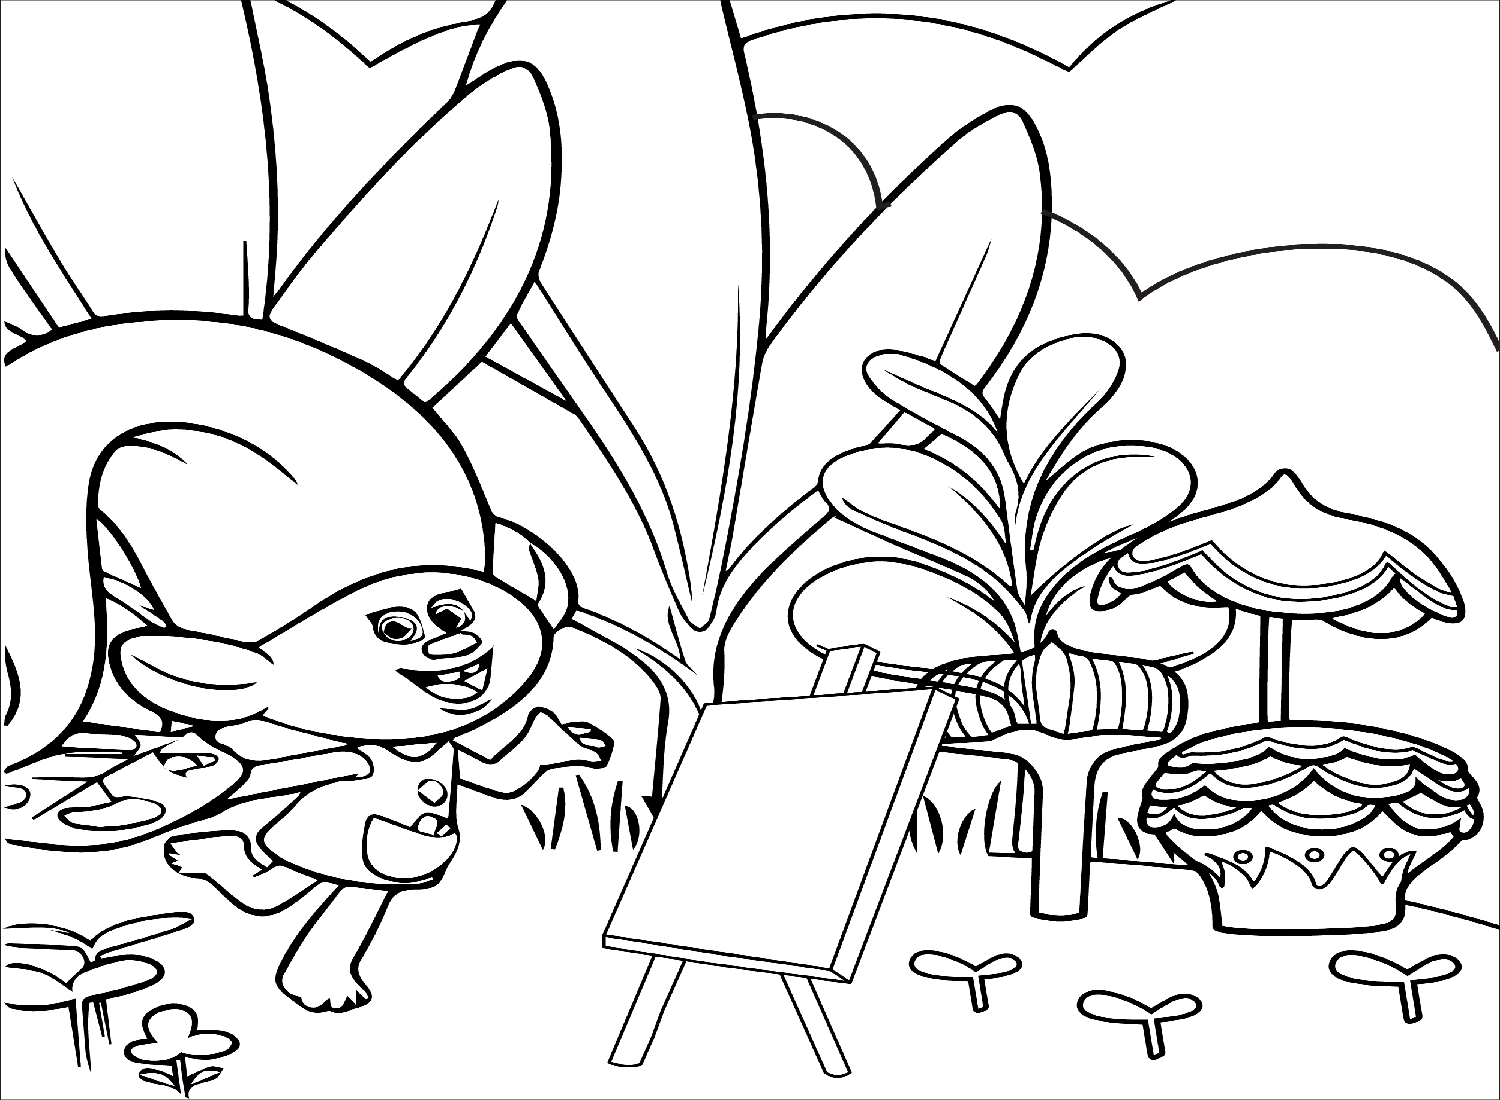 Trolls World Tour Film Coloring Page